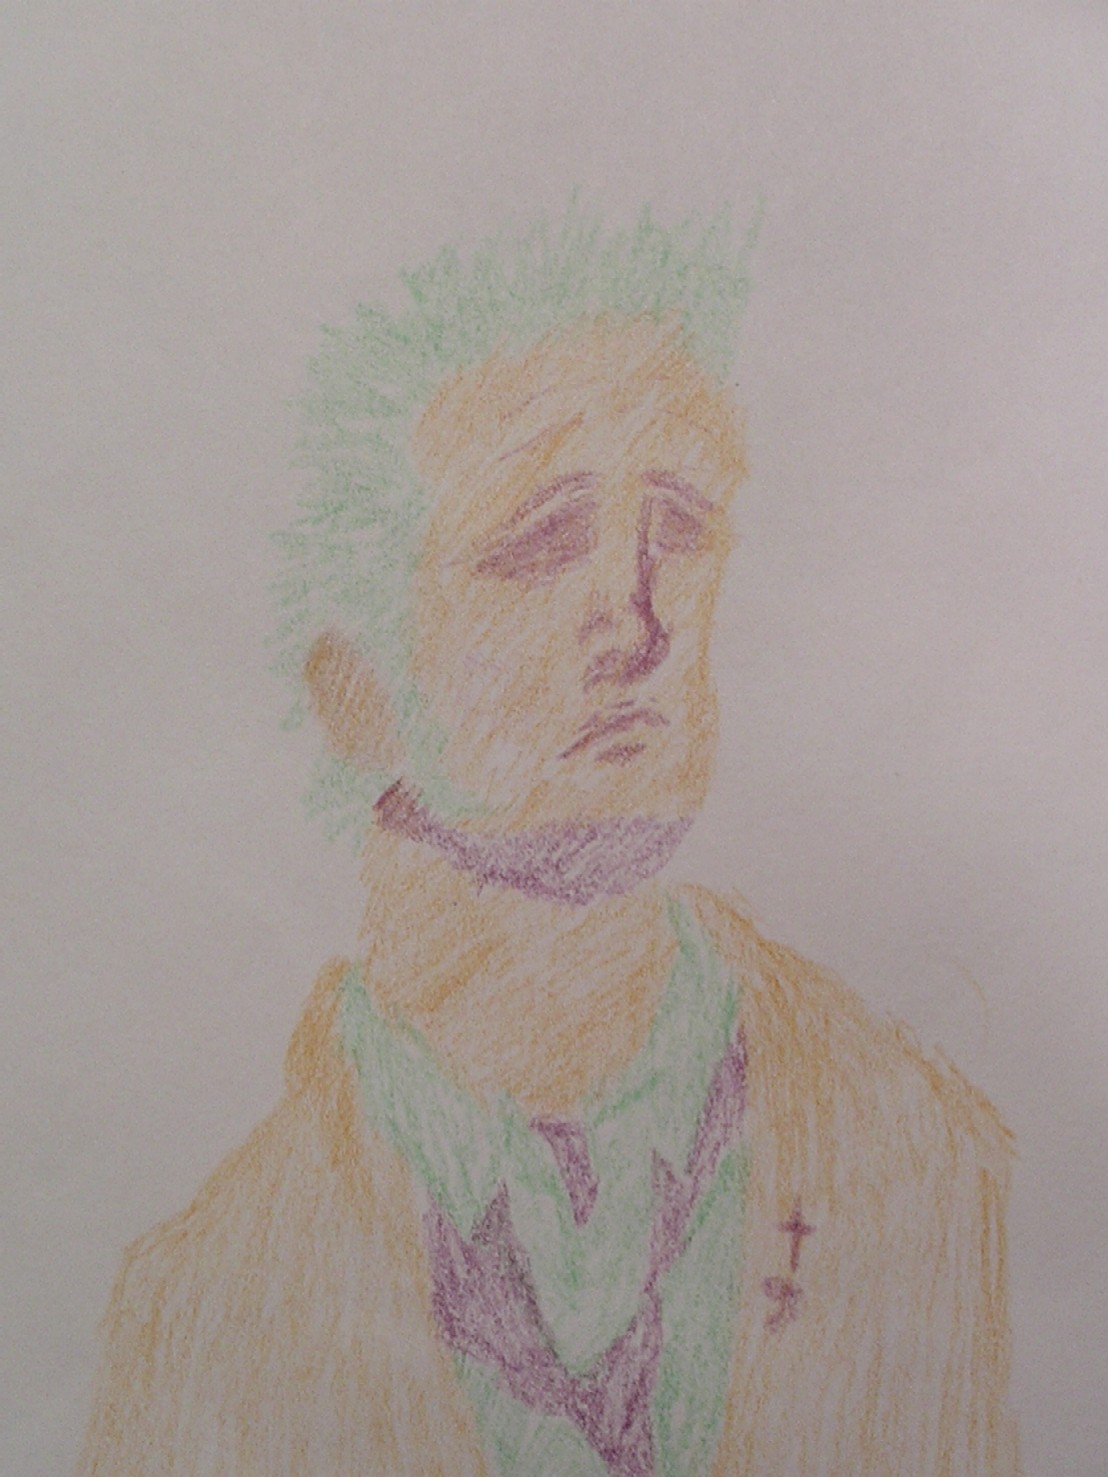 Mike Dirnt (colored pencil) by Mike_Dirnt_Obsessed